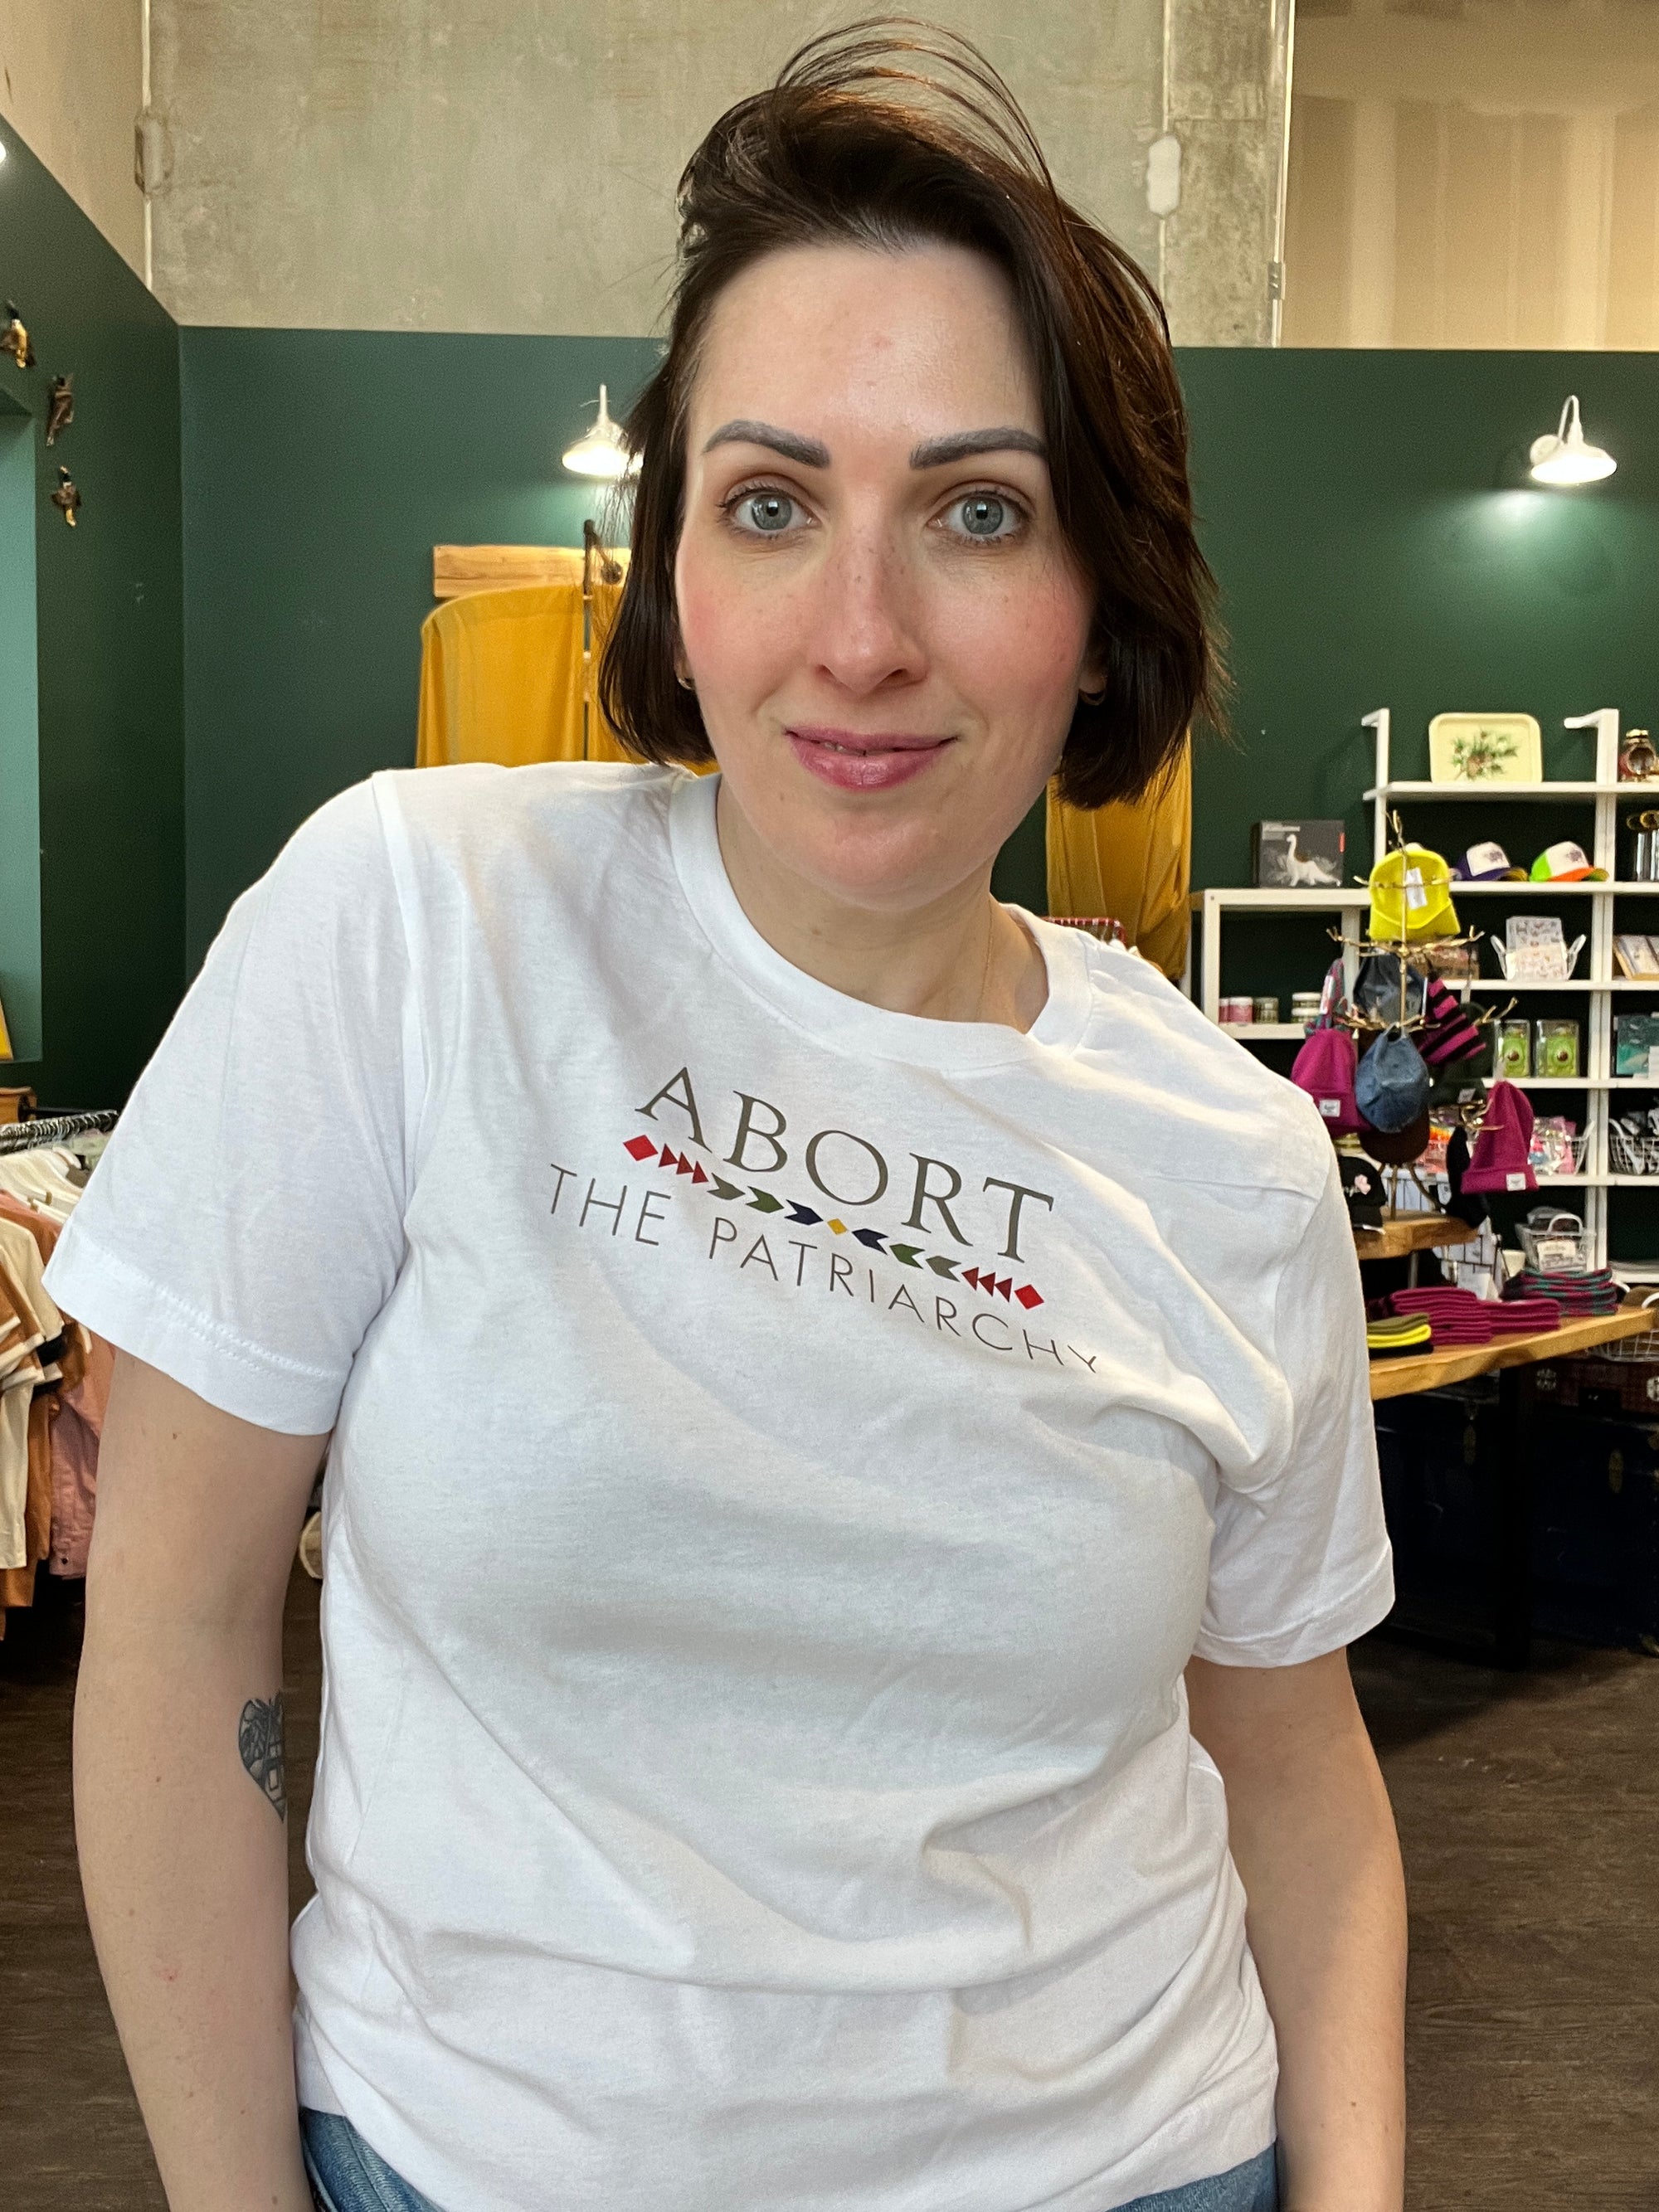 Abort The Patriarchy T-shirt